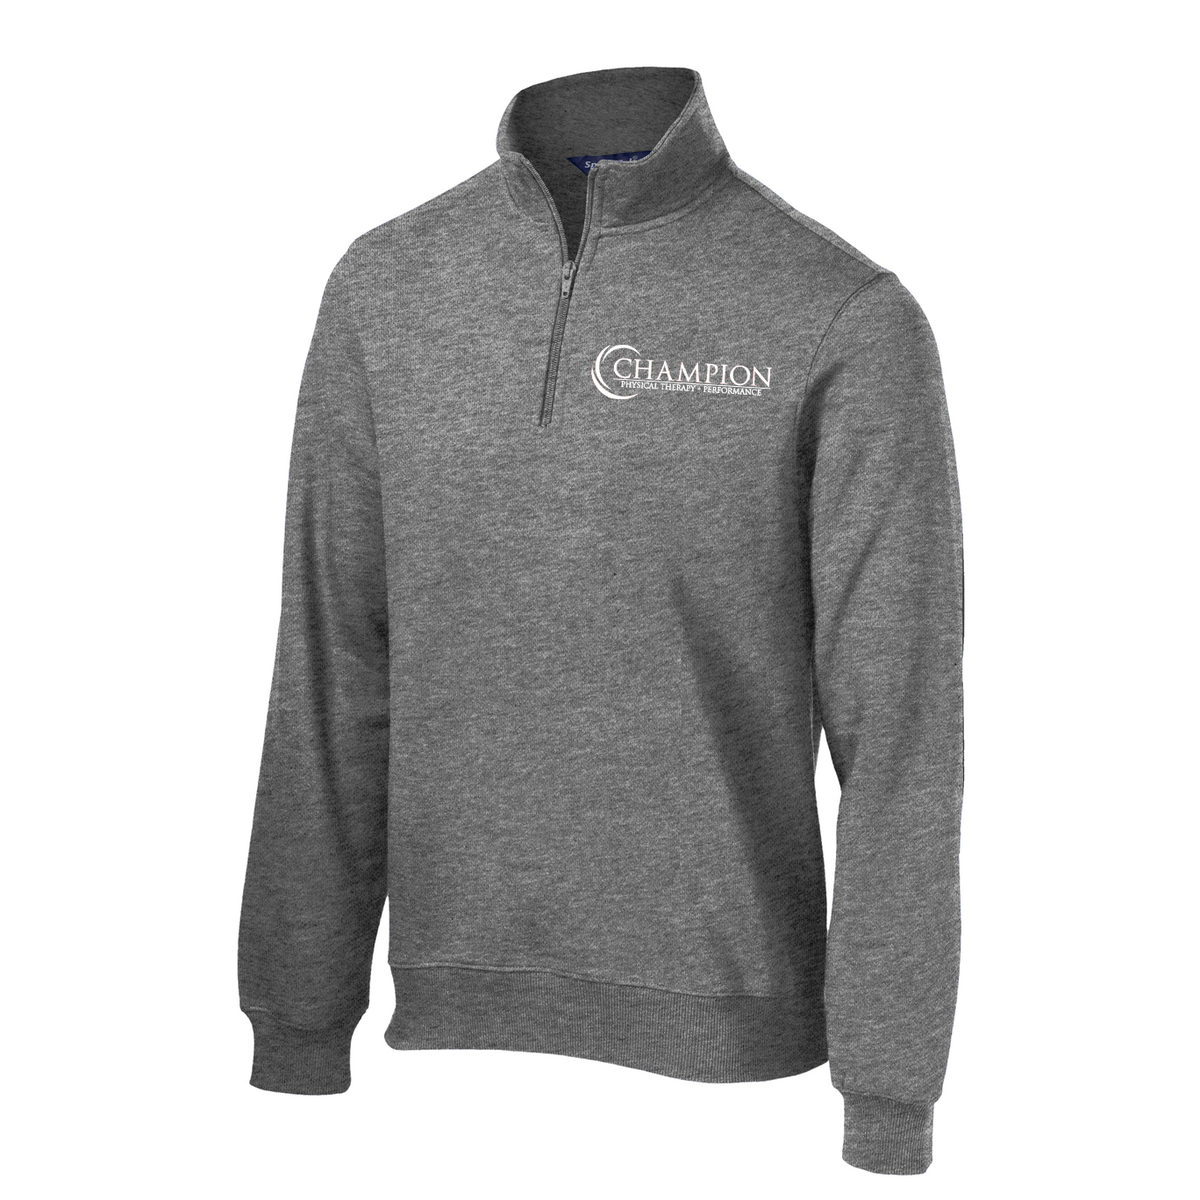 Champion Physical Therapy 1/4 Zip Fleece